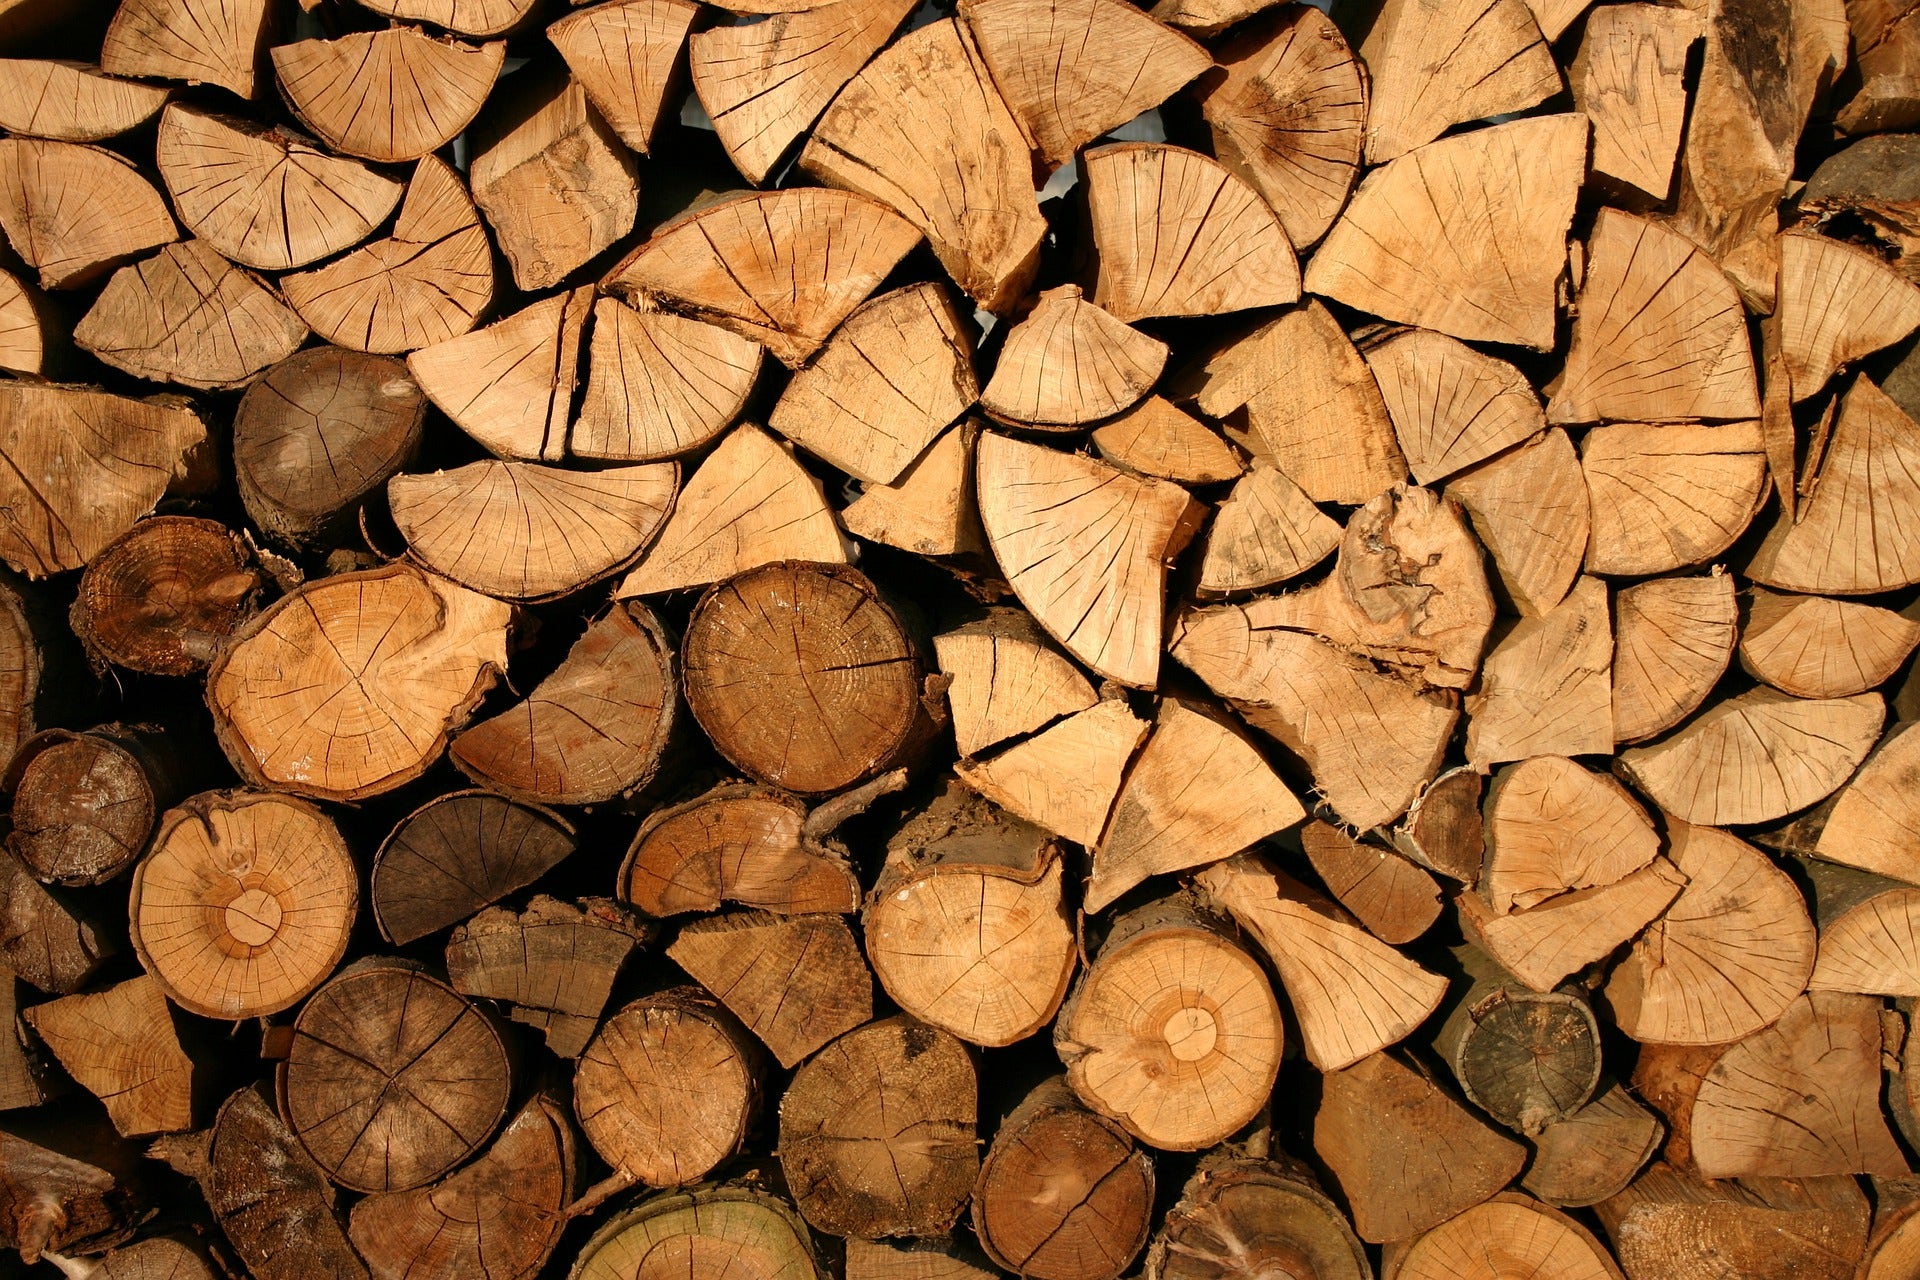 5 Stocks To Watch As Lumber Prices Return To Pre-Pandemic Levels